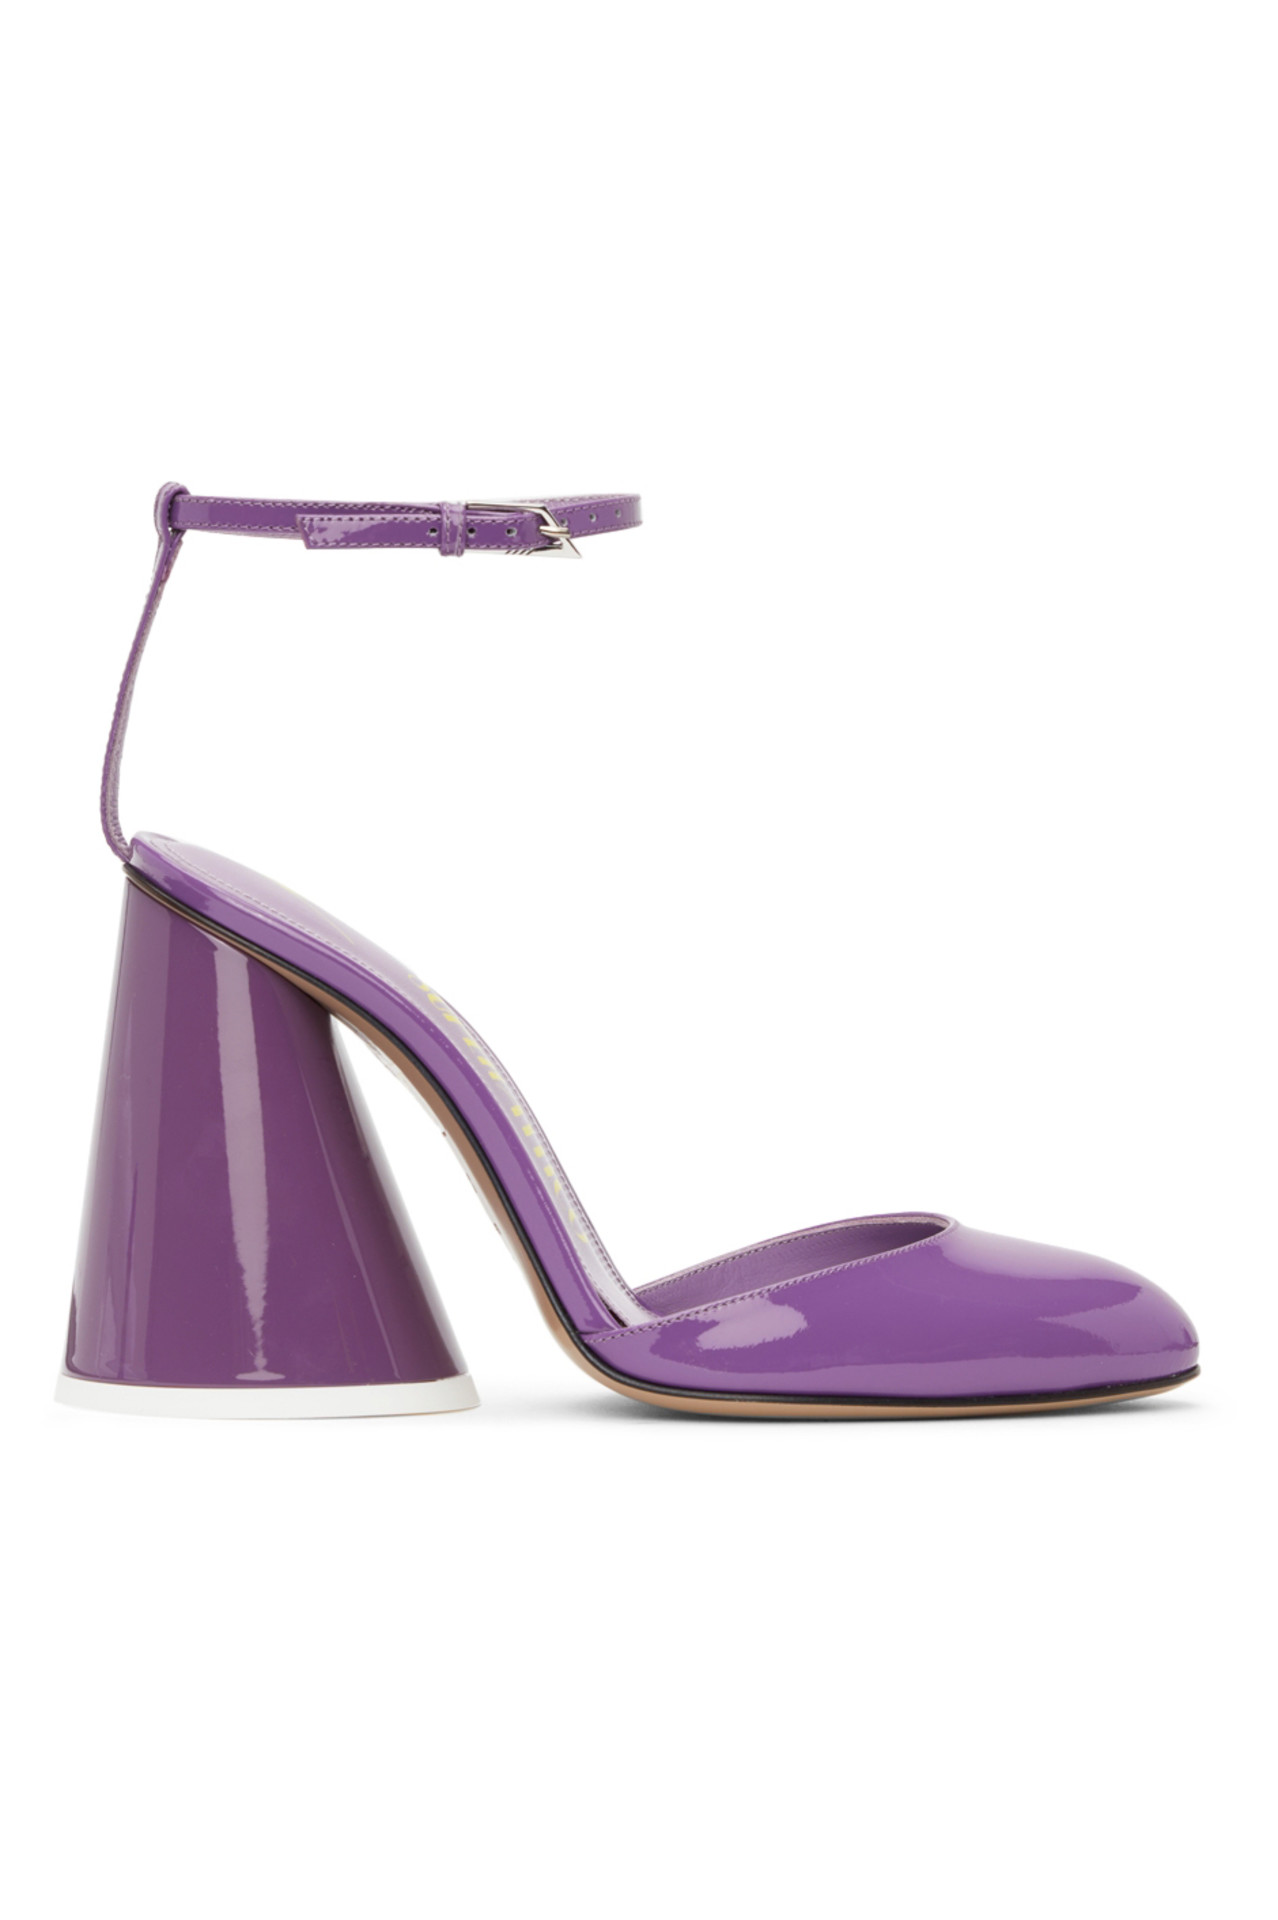 The 25 Best Purple Heels That Are Chic and Affordable | Who What Wear